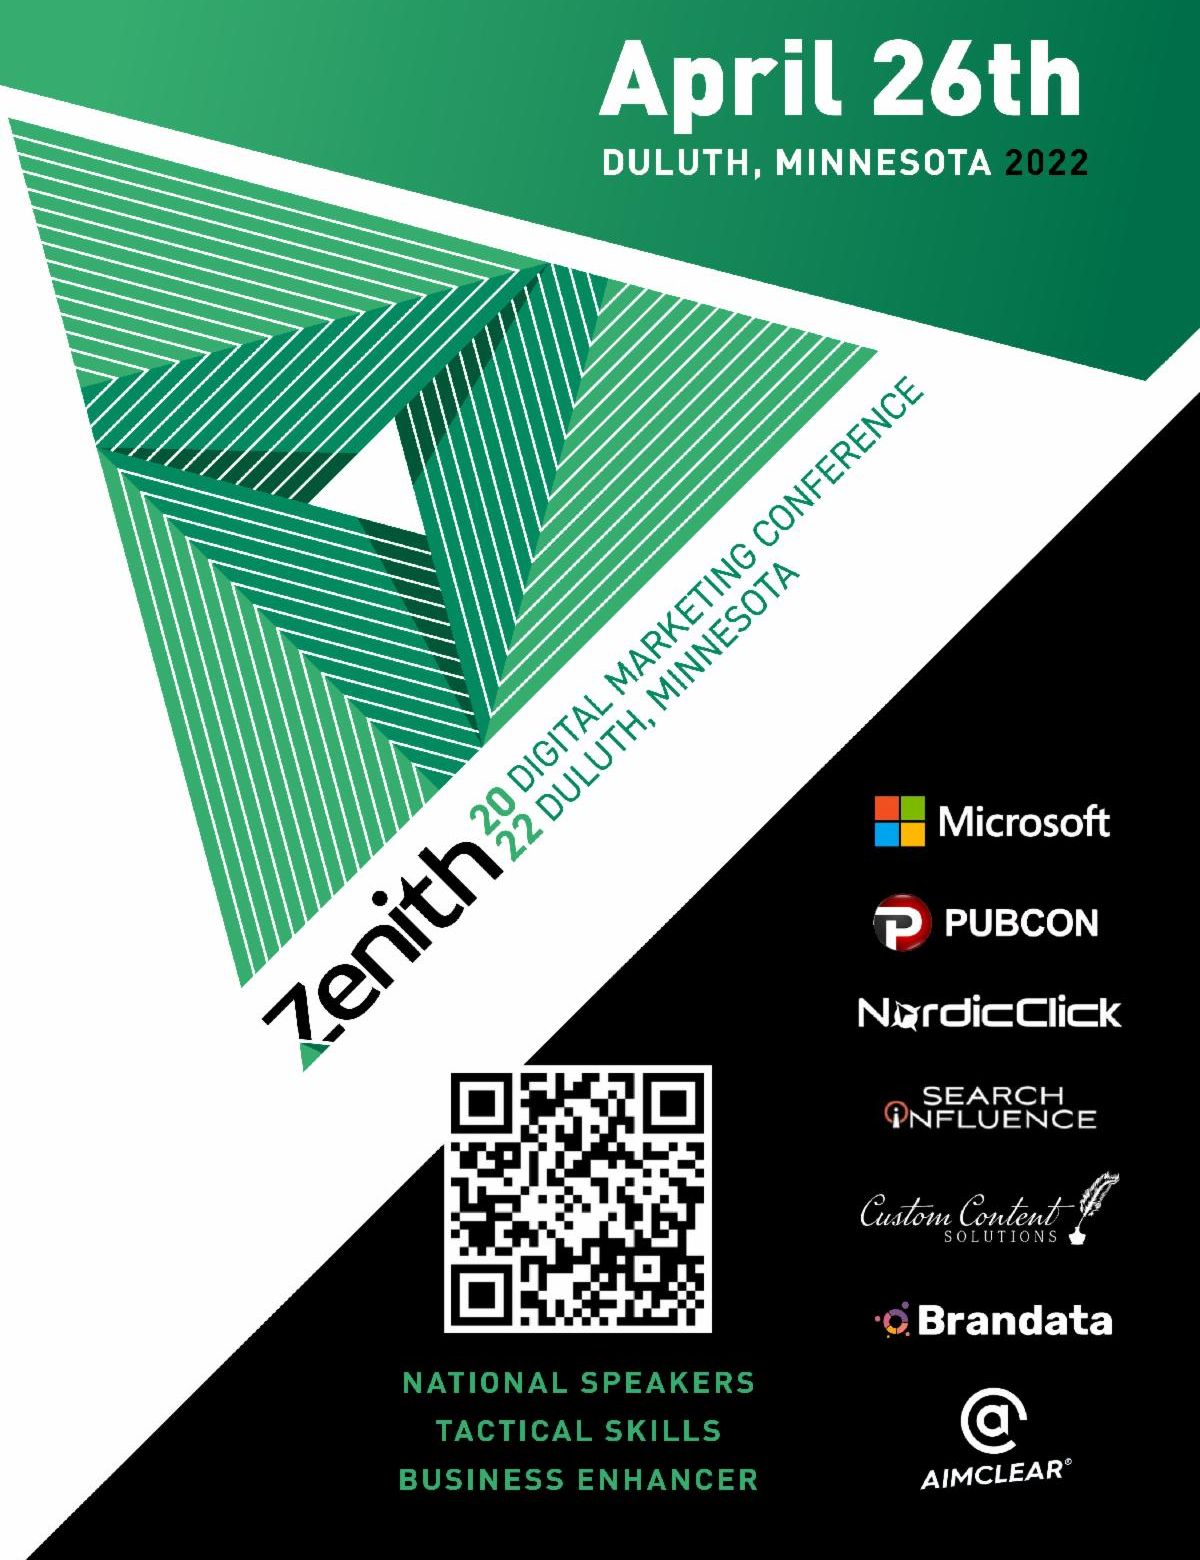 Zenith 2022 Digital Marketing Conference Poster